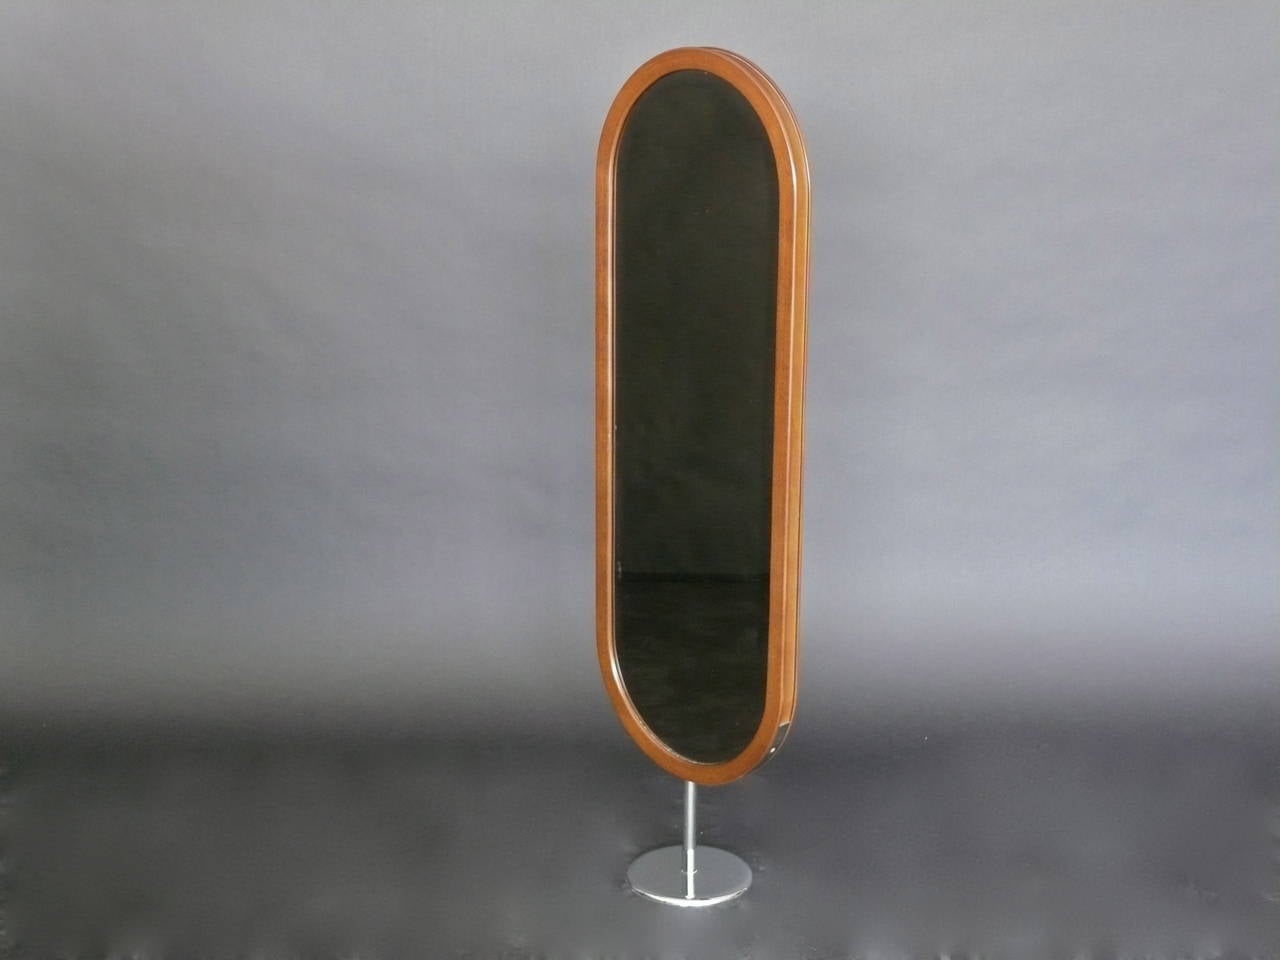 Slender German floor mirror made of teak and resting on a circular chrome base. Wood and glass in excellent vintage condition. Small scale. Perfect for a child's room.